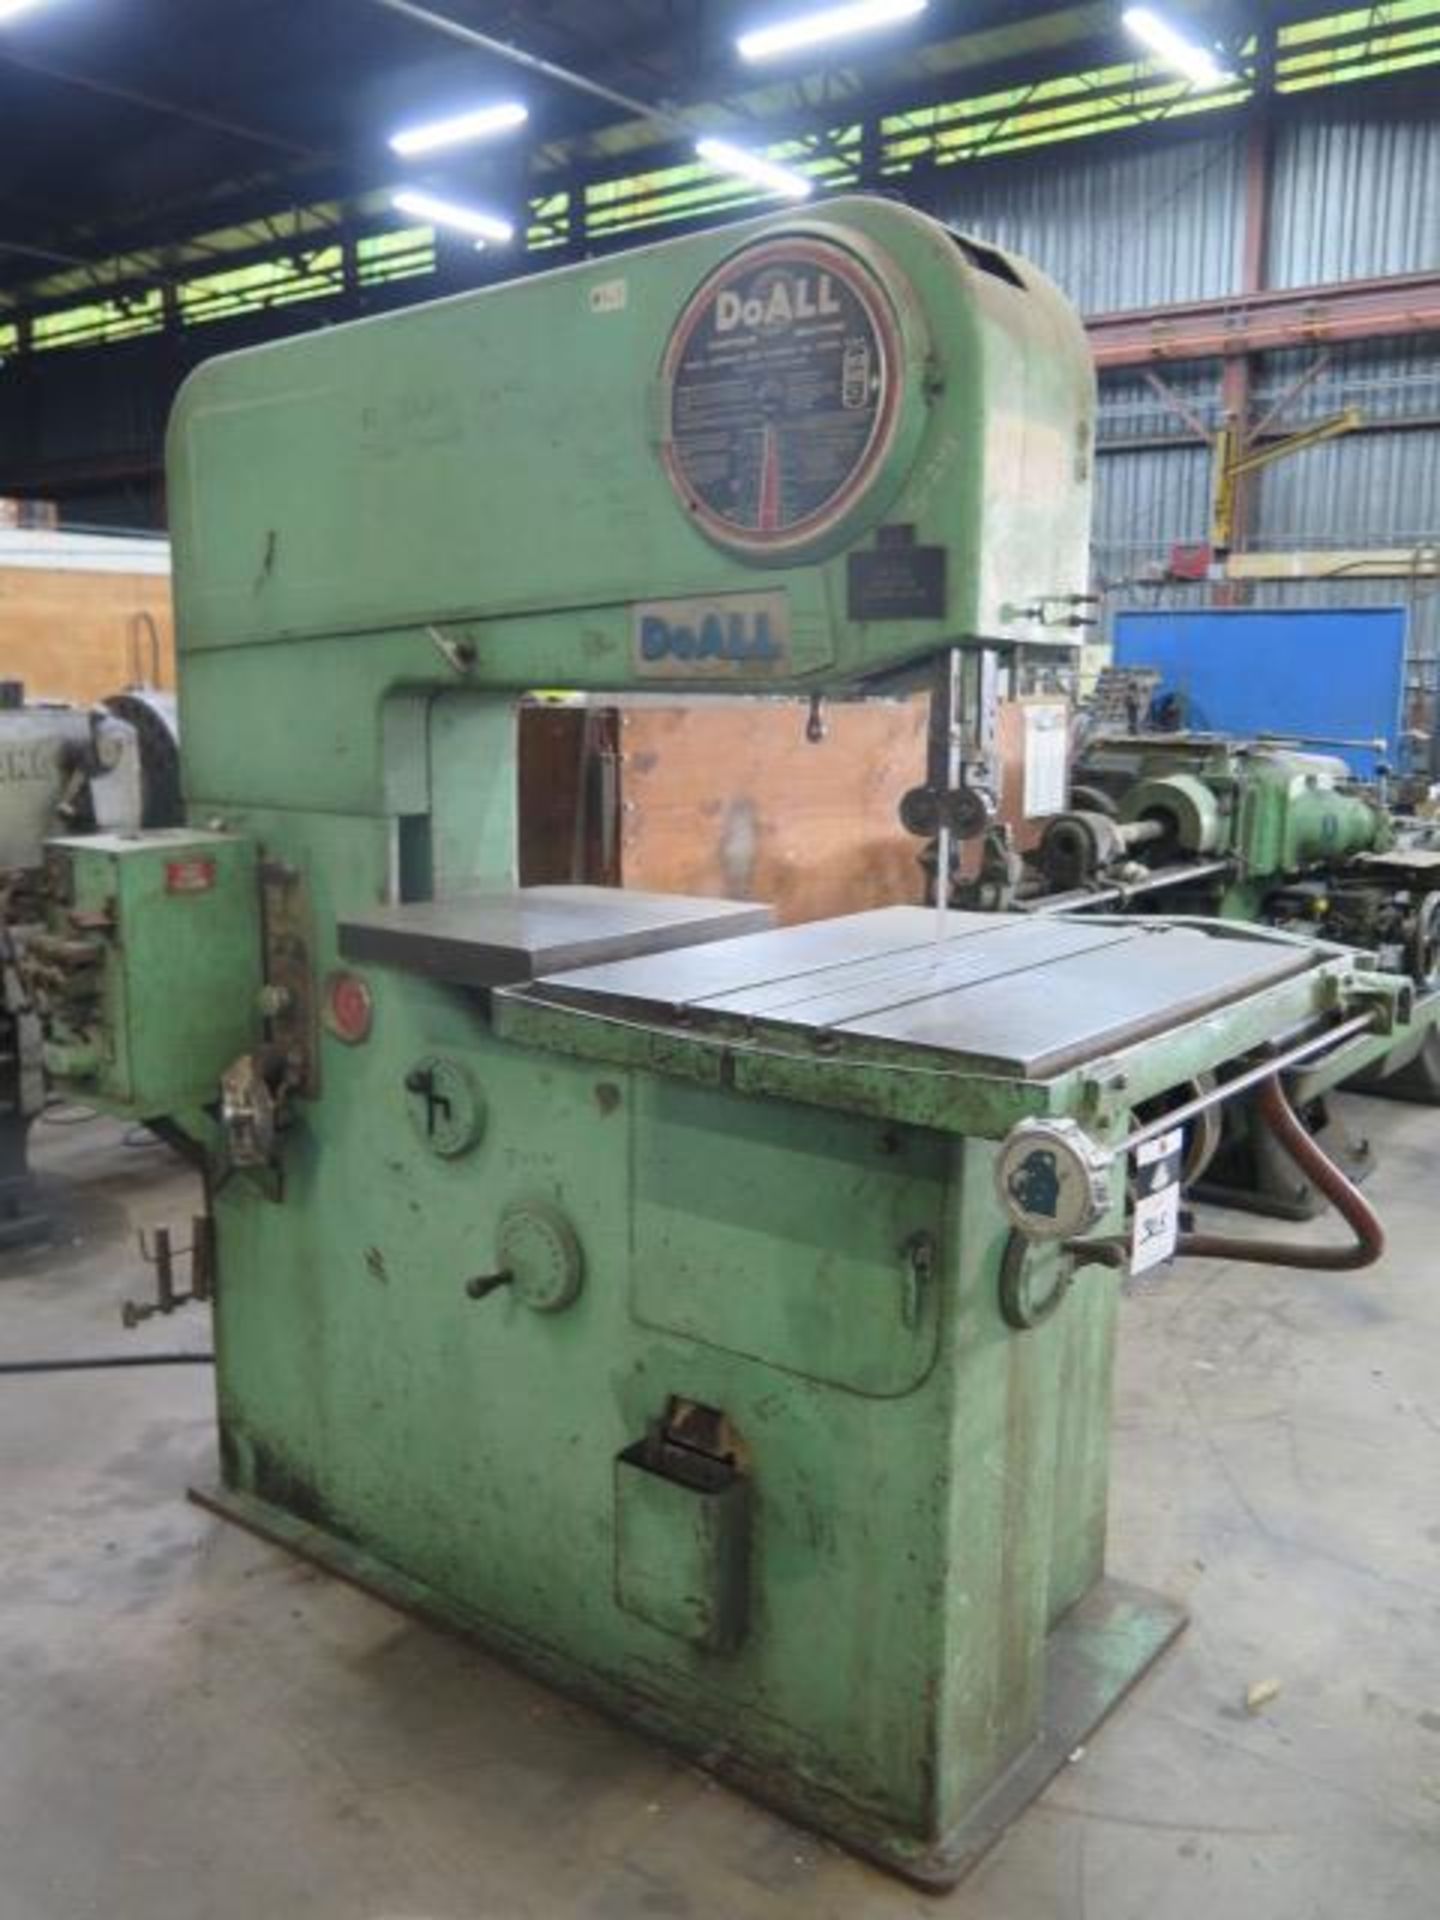 DoAll 36-3 36” Vertical Band Saw s/n 53-56296 w/ Blade Welder, 6000 Dial FPM, SOLD AS IS - Image 2 of 8